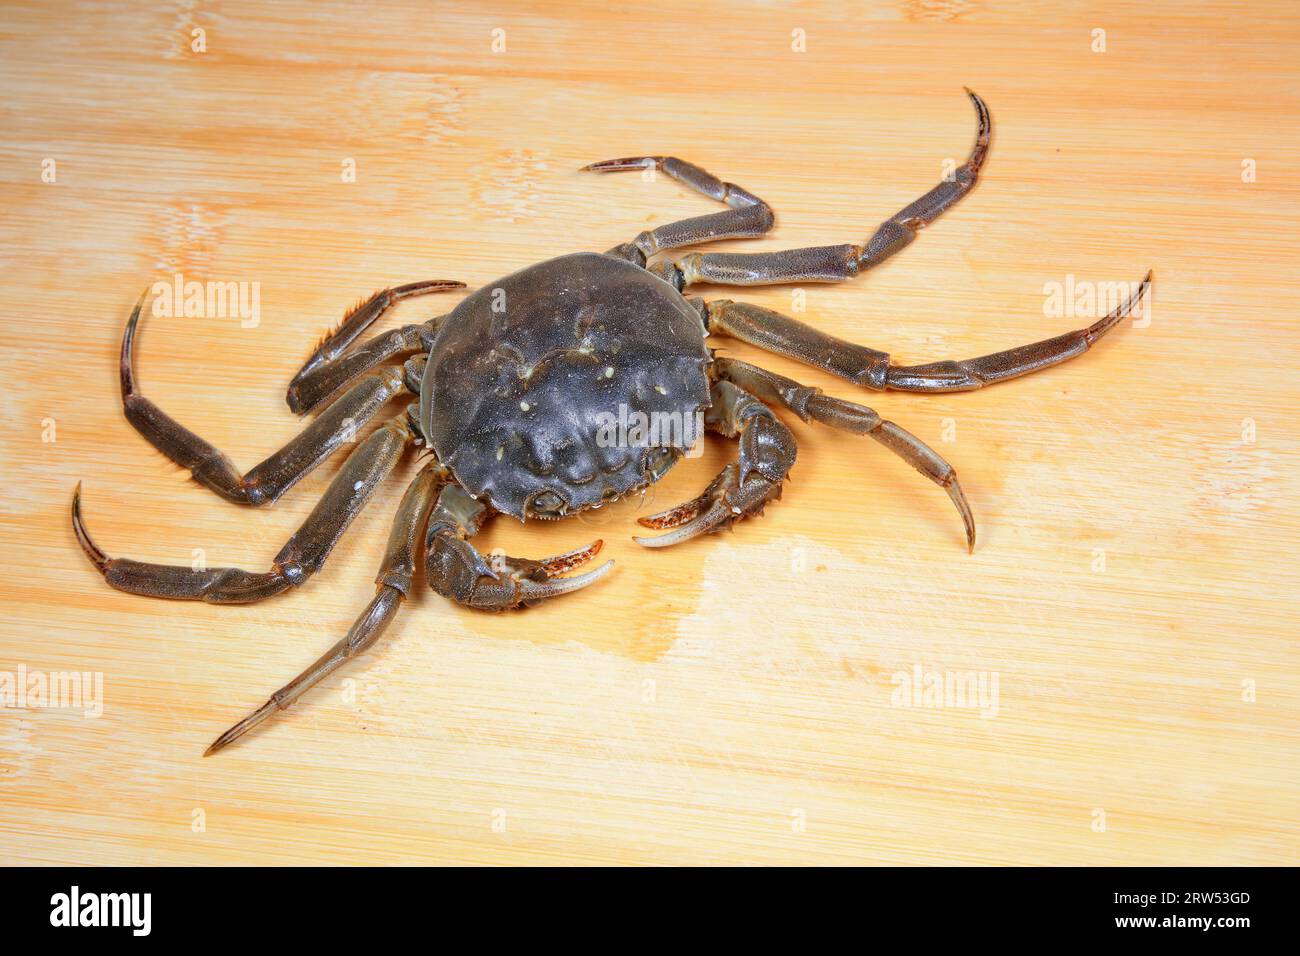 Fresh river crabs on the cutting board Stock Photo